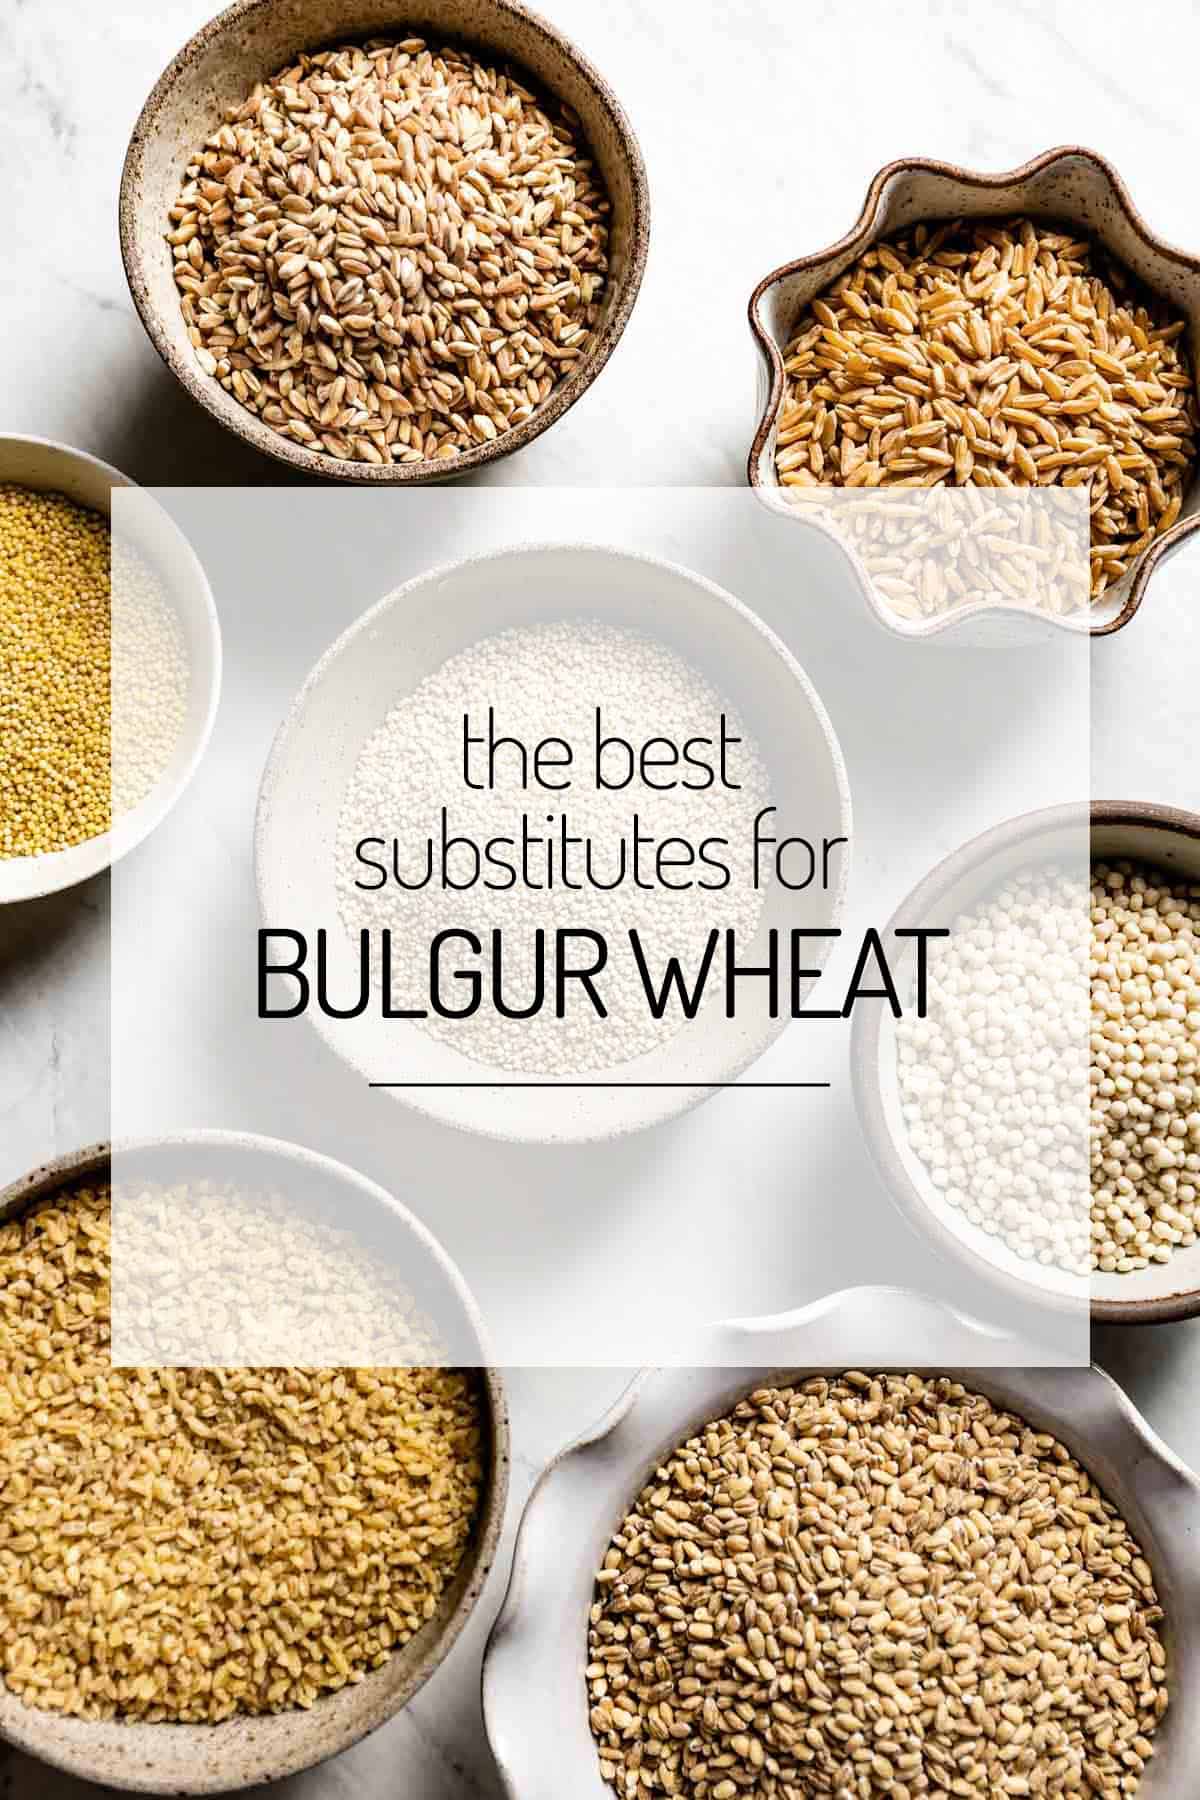 Substitutes for Bulgur Wheat such as barley, millet and quinoa placed in bowls from the top view.